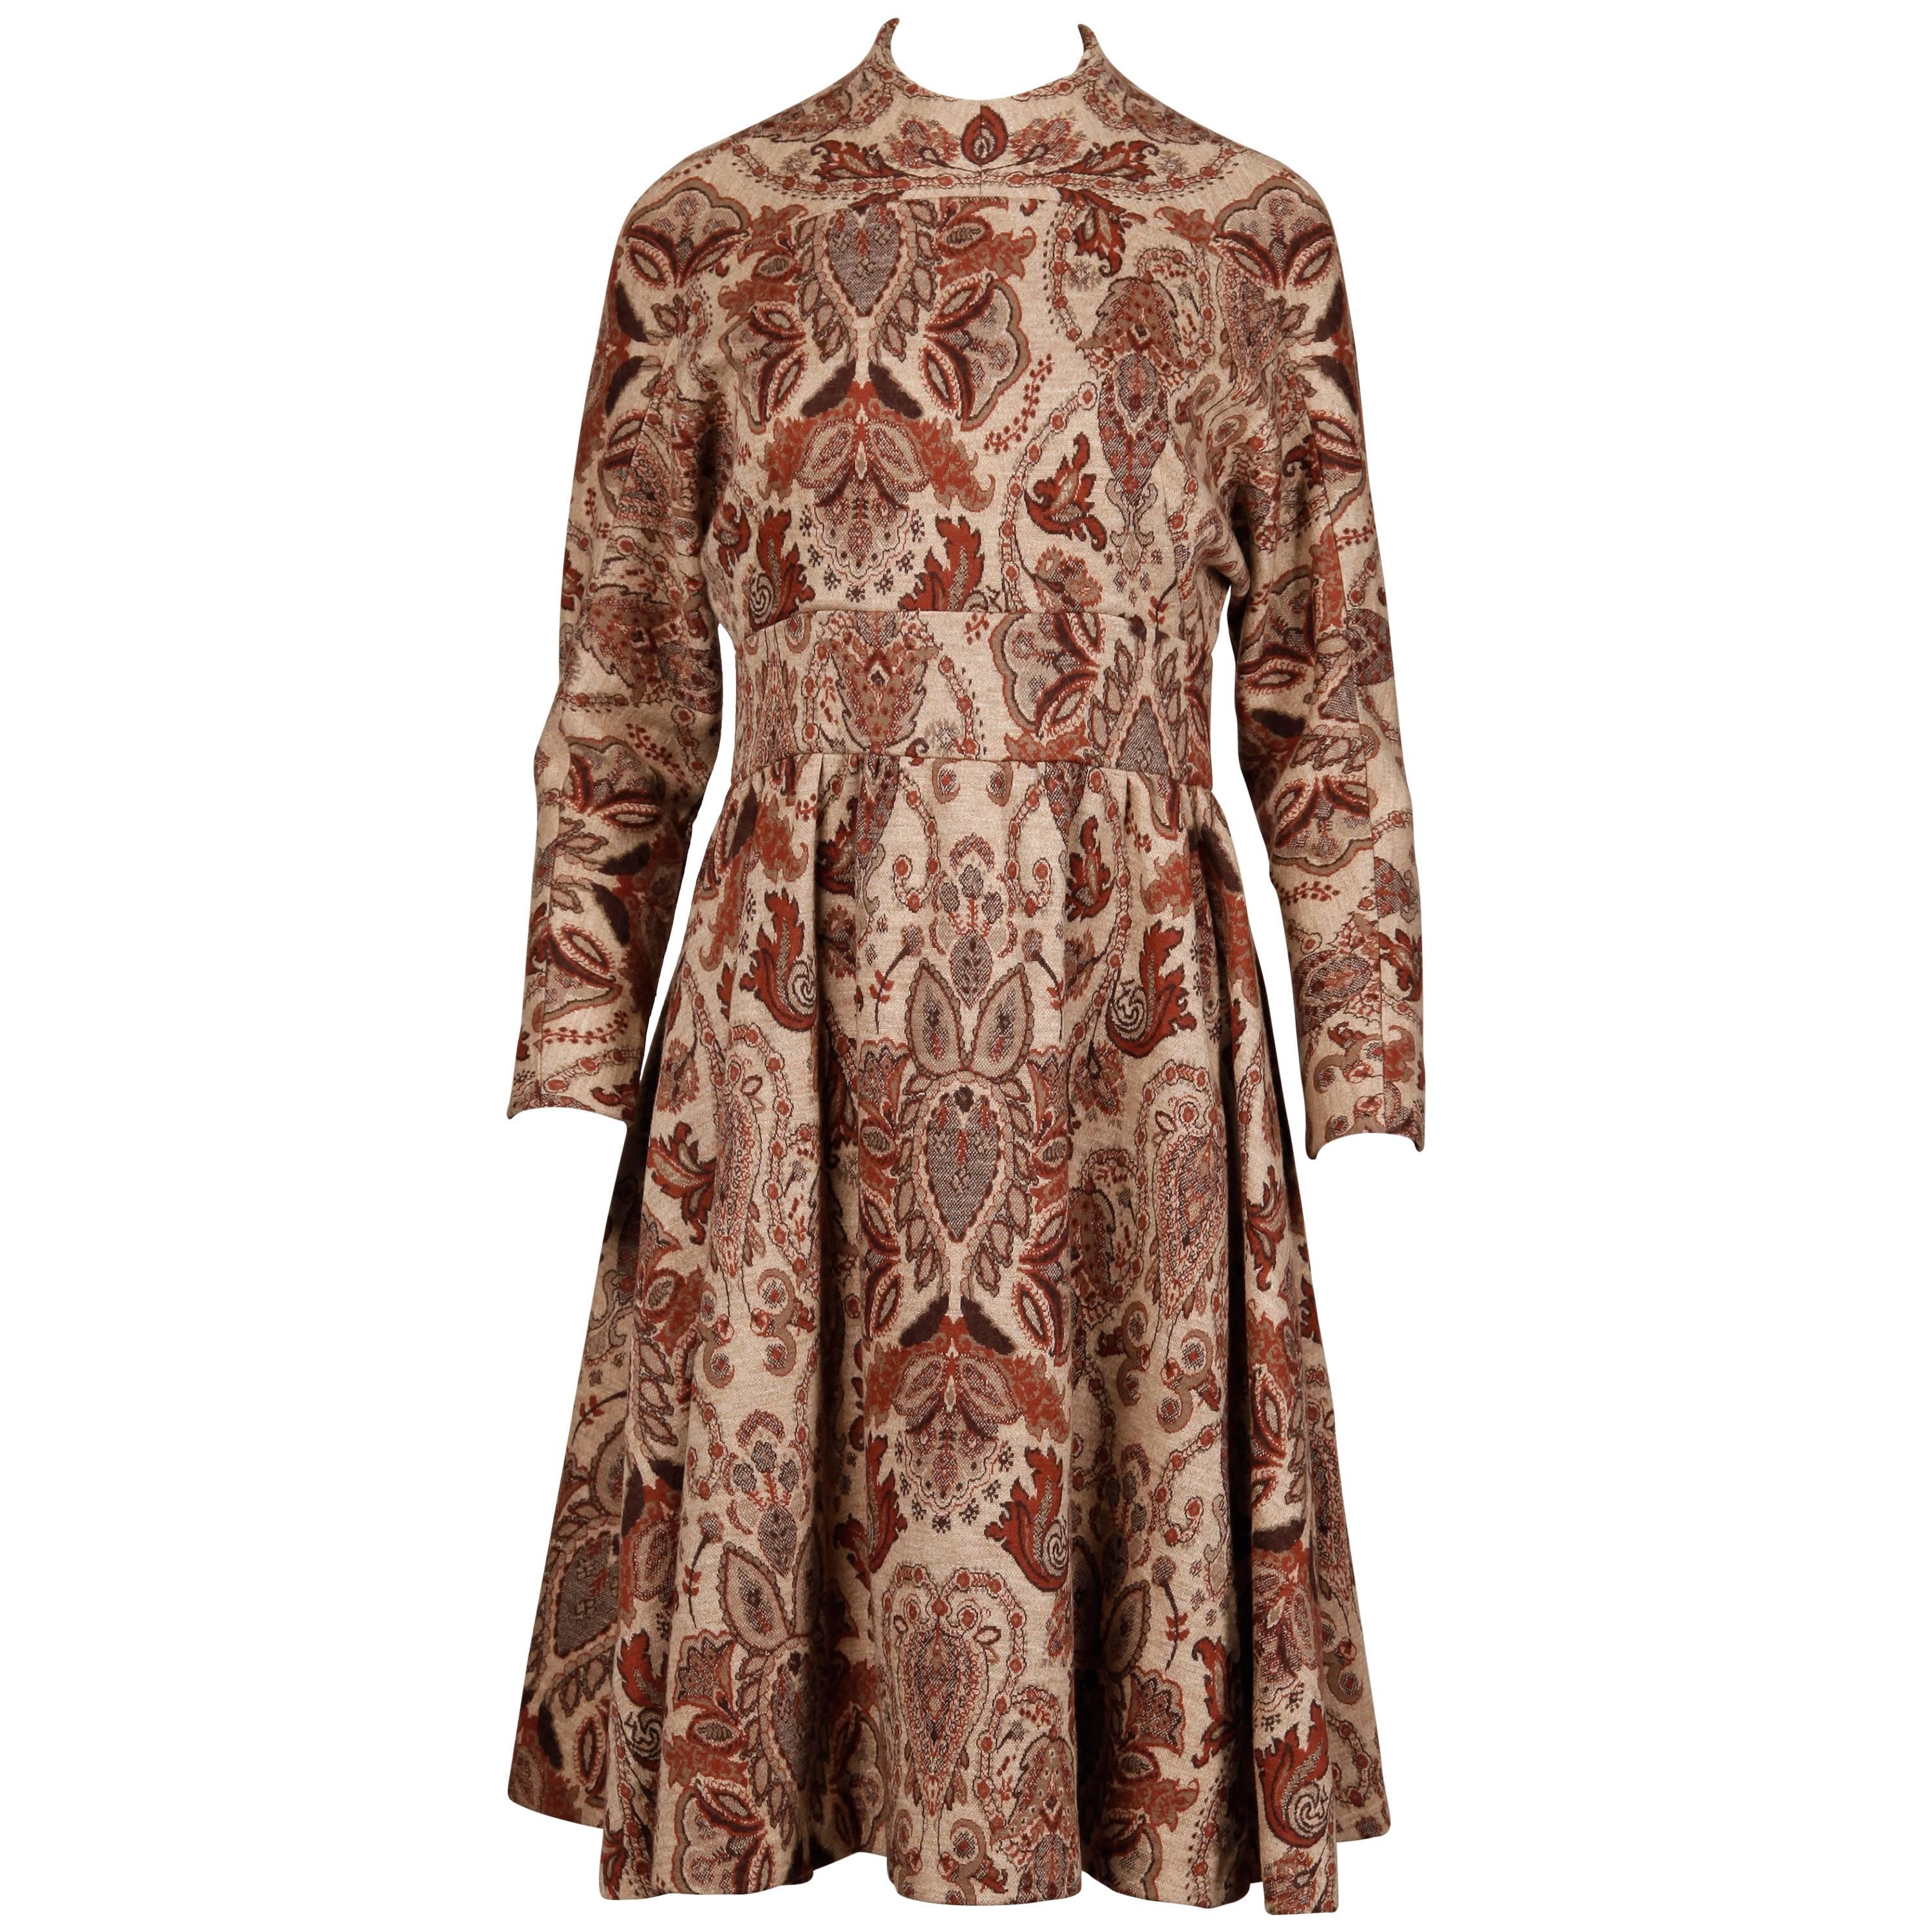 1970s Geoffrey Beene Vintage Wool Knit Paisley Tapestry Dress with Long Sleeves